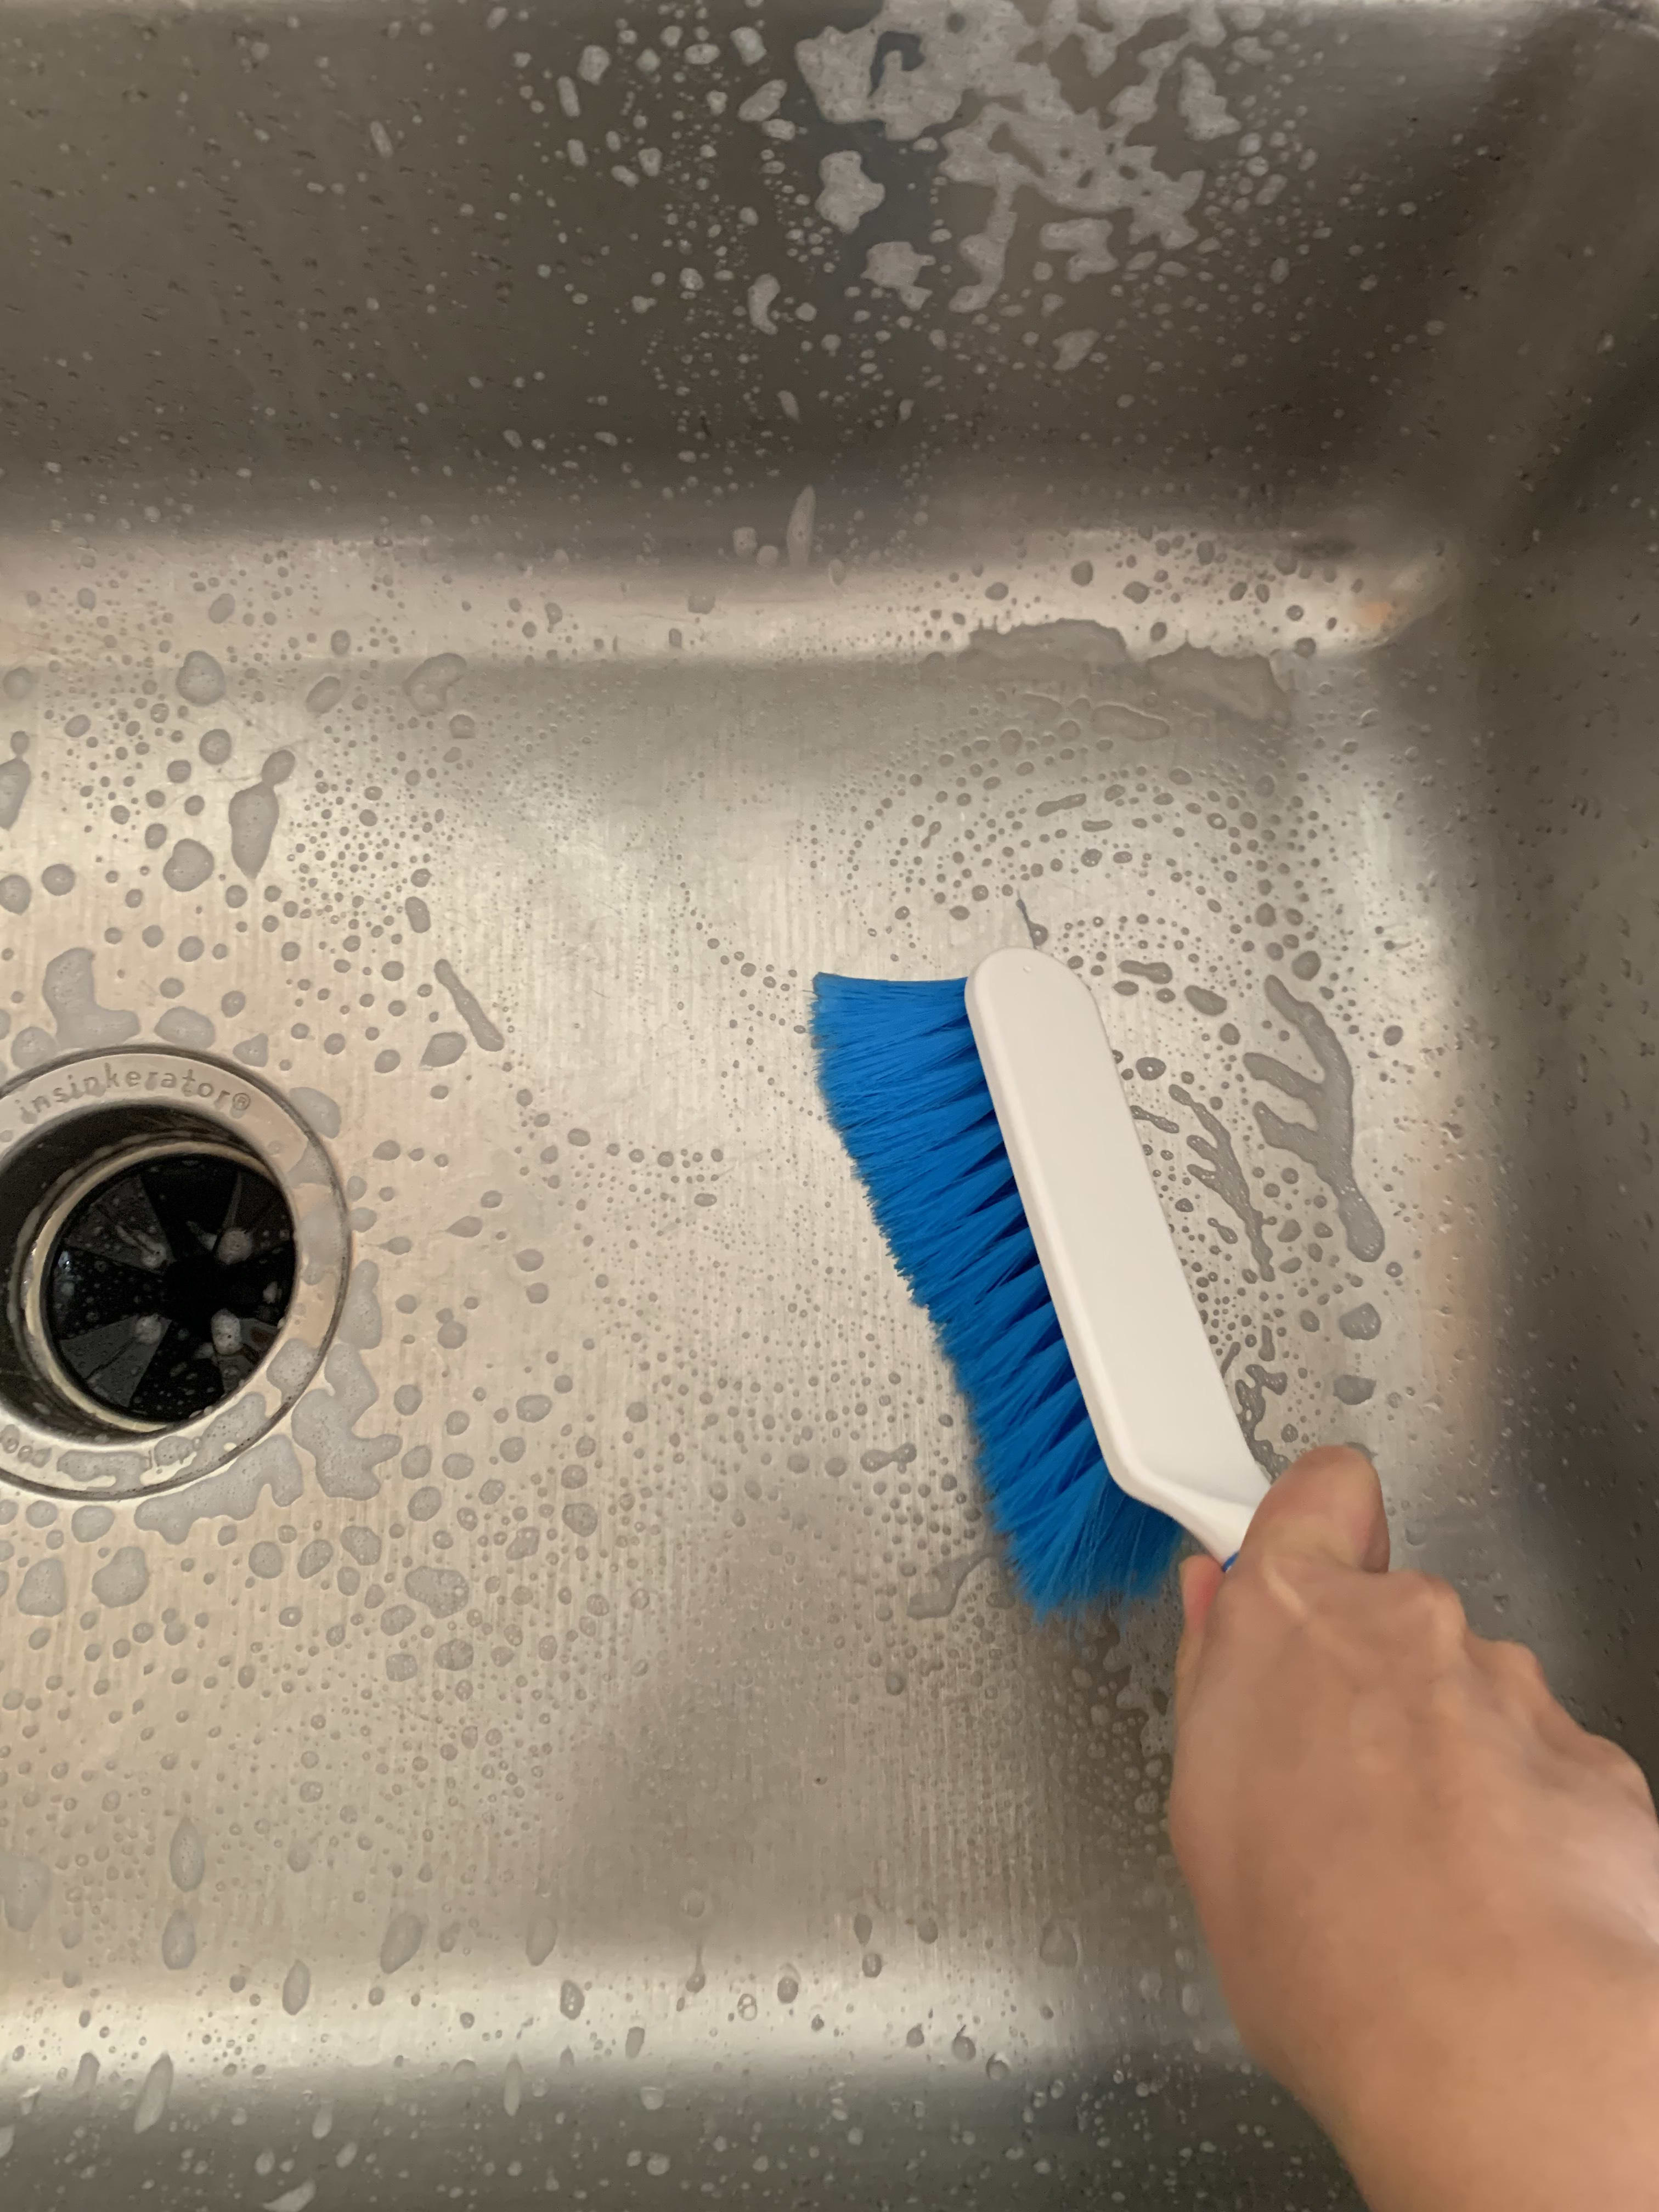 https://cdn.apartmenttherapy.info/image/upload/v1666801798/k/Edit/2022-10-Dust-Brushes-Sink-Cleaning/scrubbing_sink_with_brush.jpg